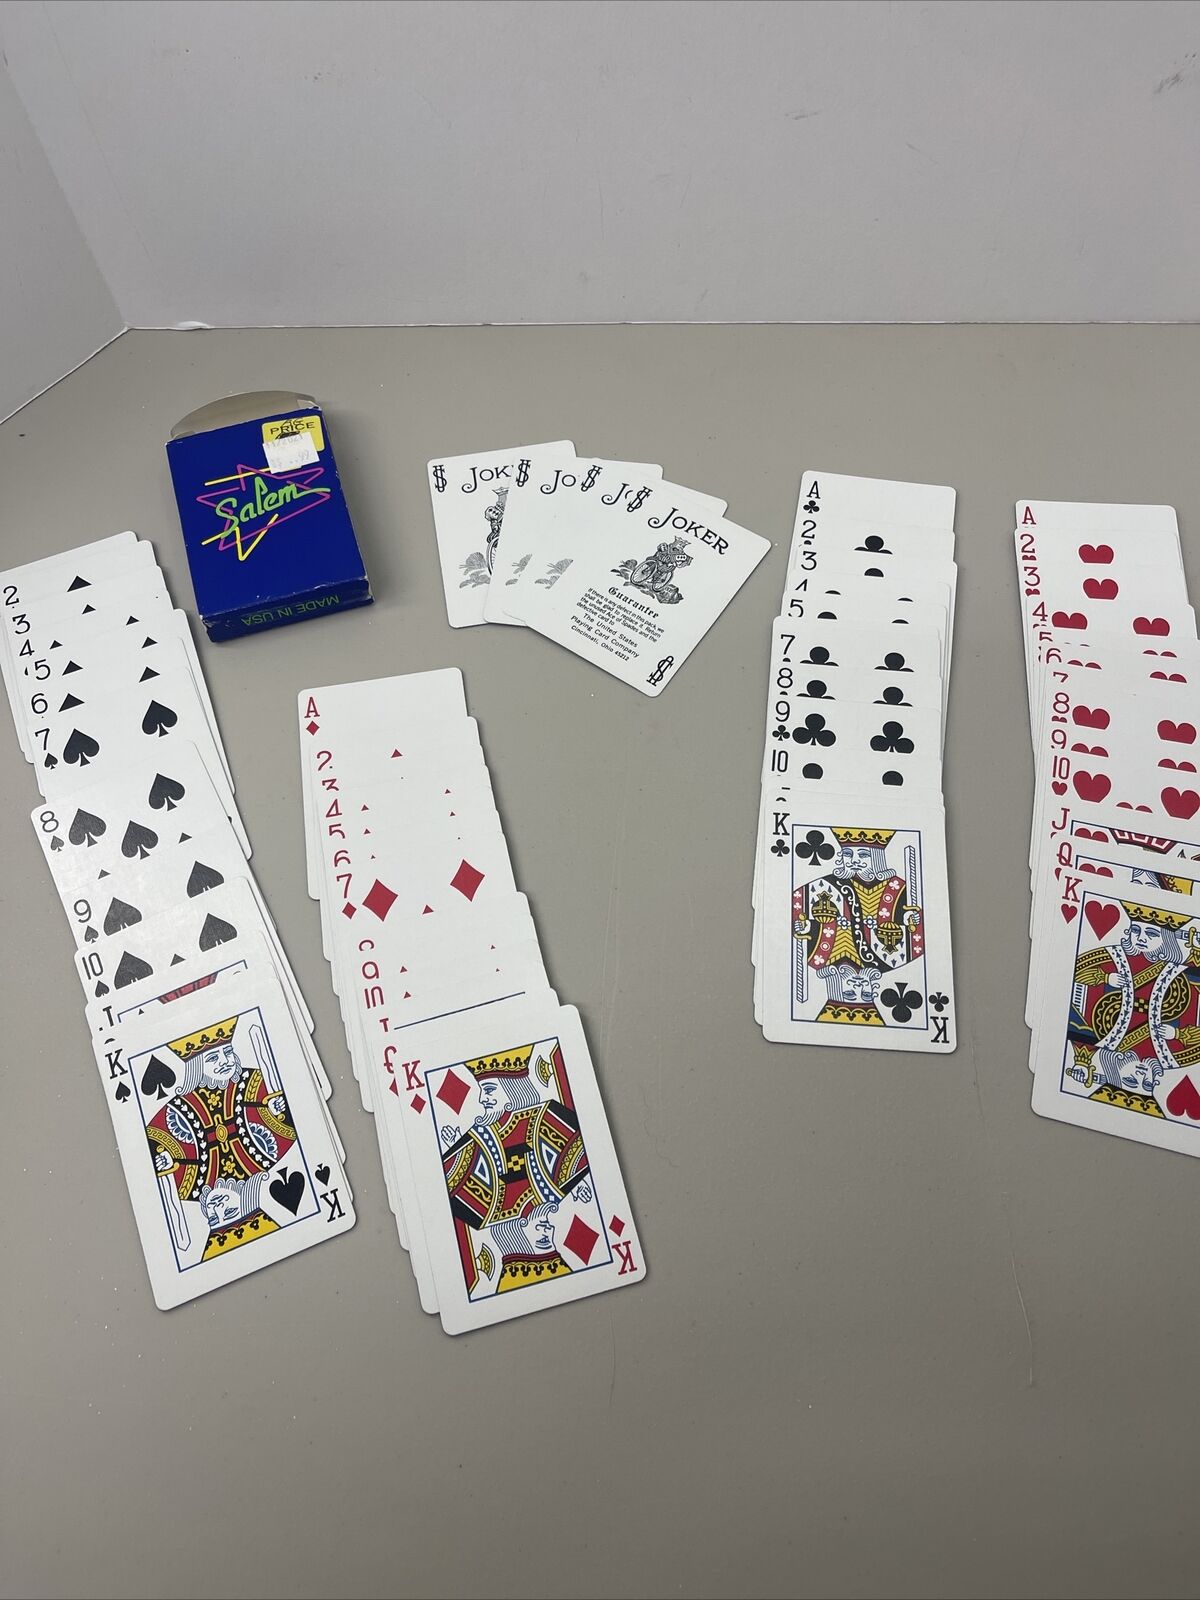 SALEM PLAYING CARDS EUC - Complete